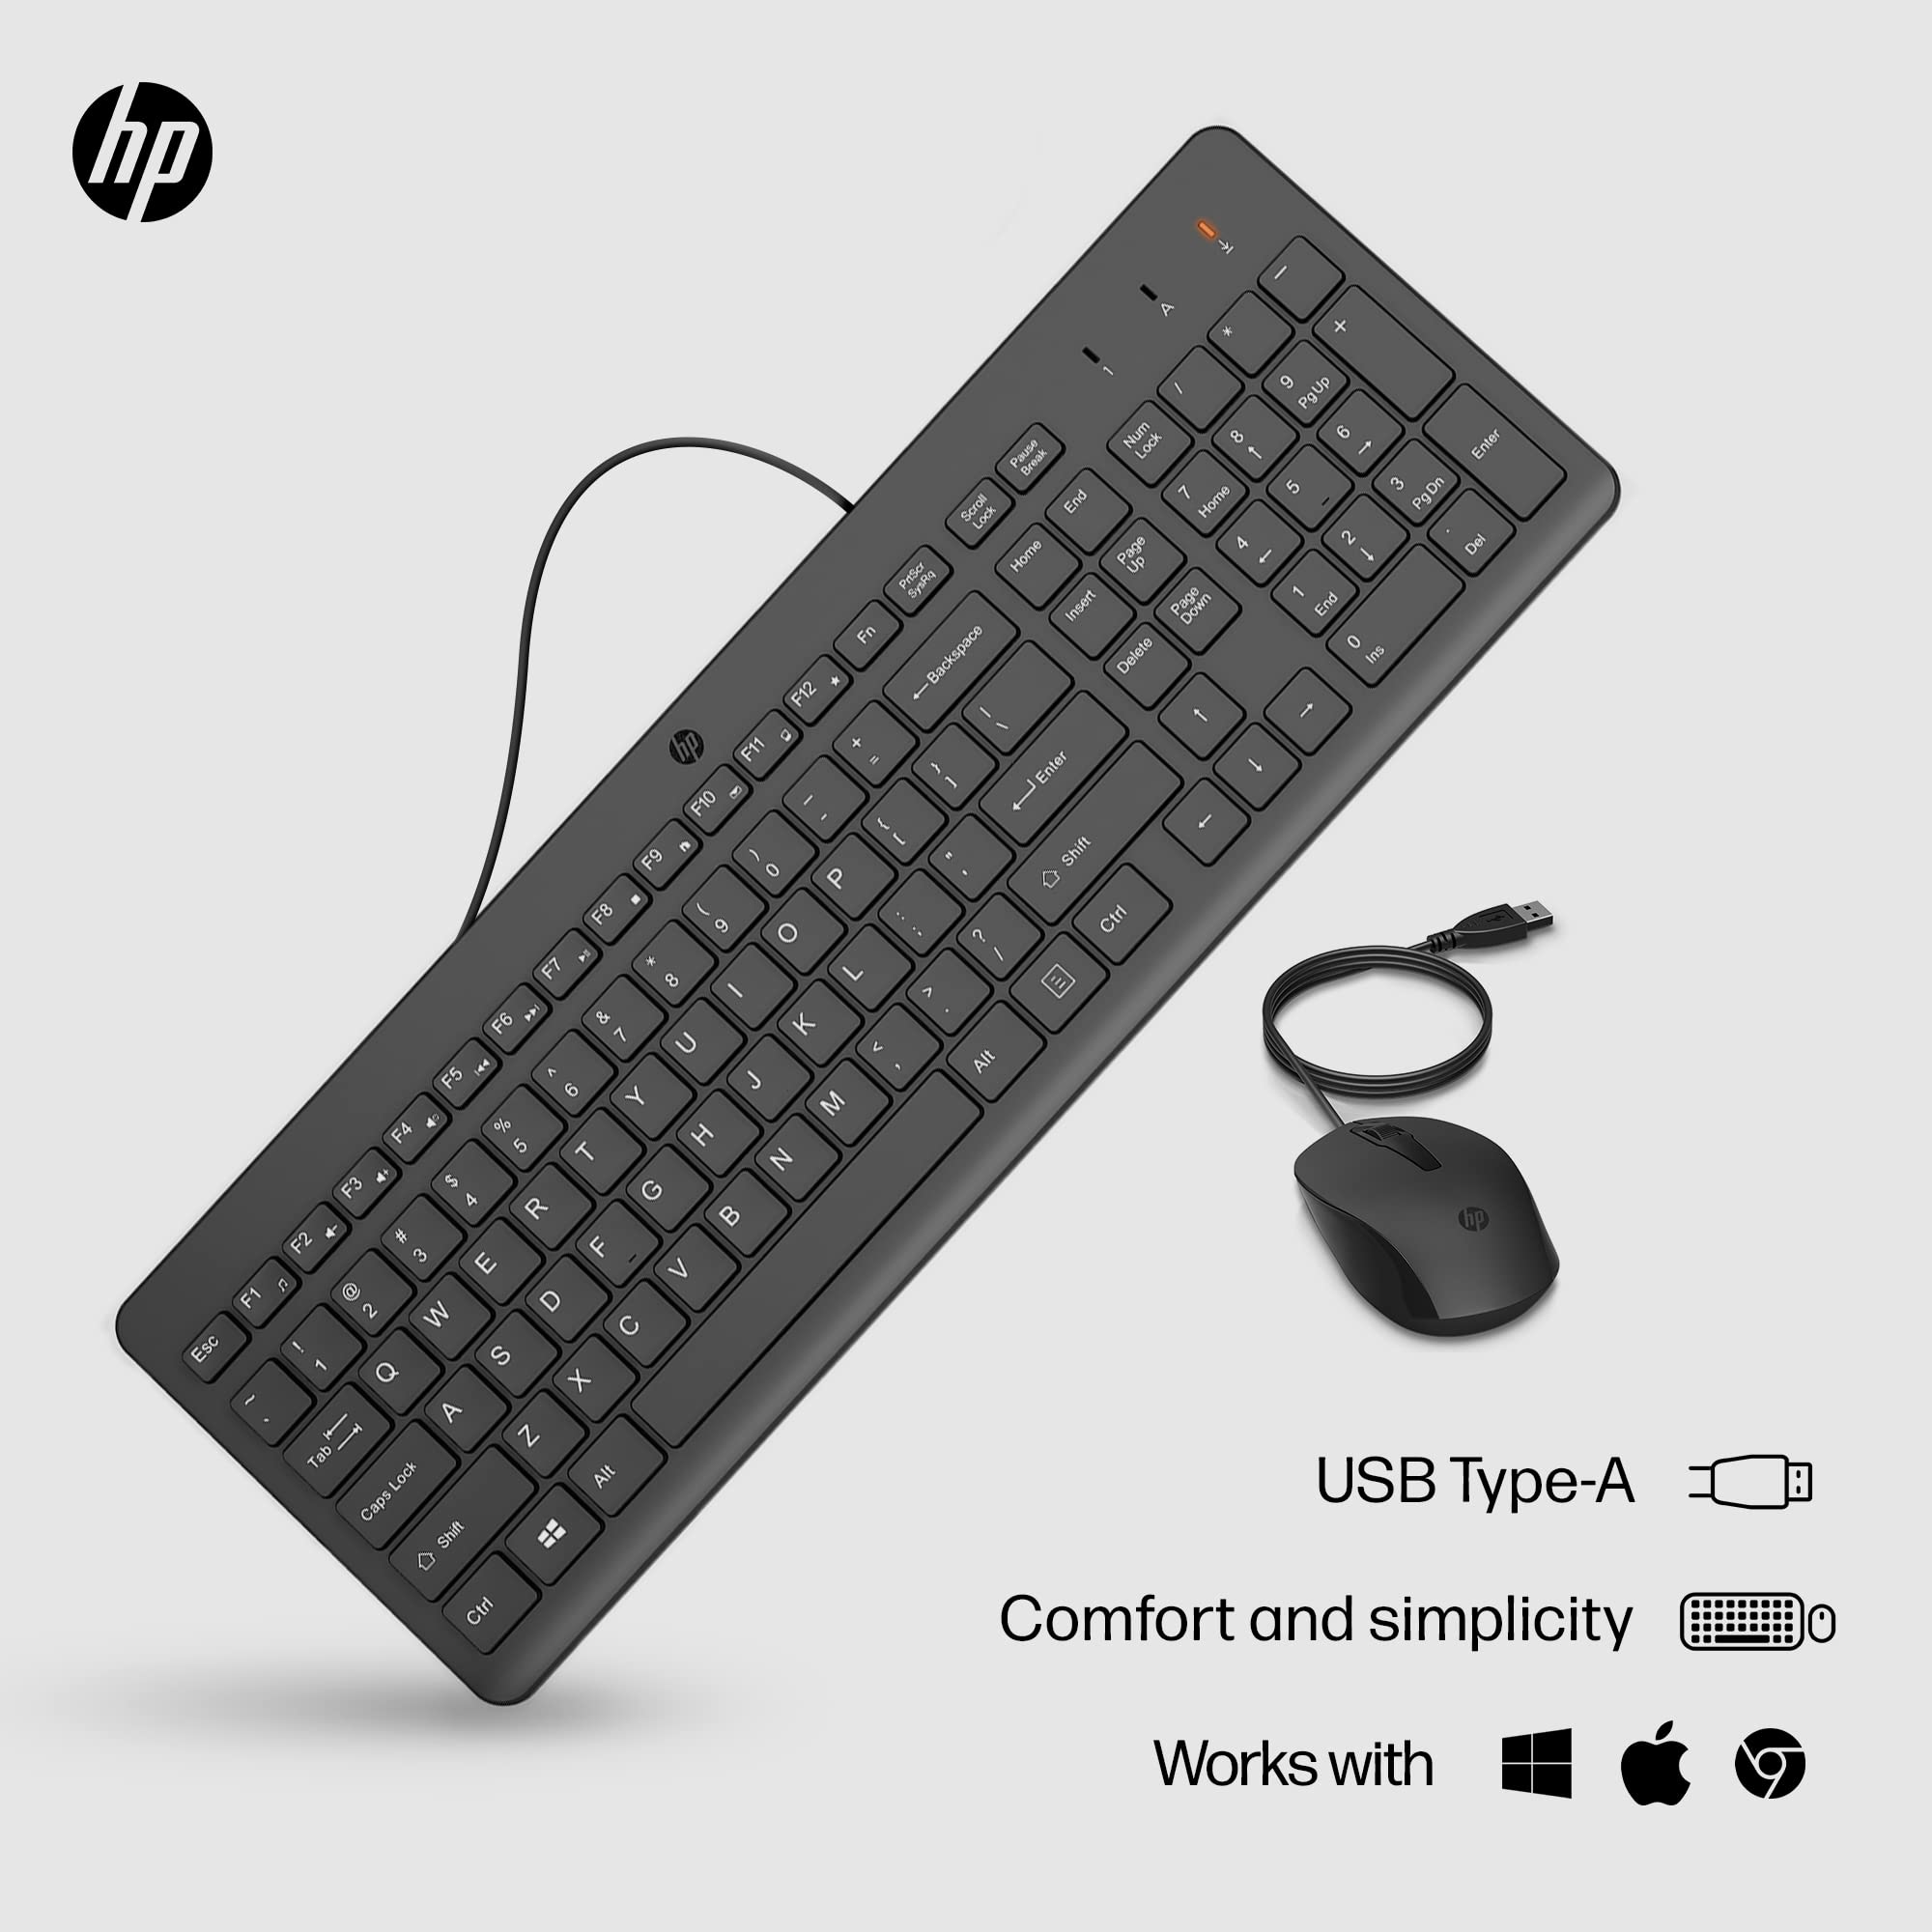 HP 150 Wired Mouse and Keyboard Combo - Full-Sized, Low-Profile Keyboard with Numeric Keypad - 1600 DPI Optical Sensor, Multi-Surface Wired Mouse - USB Plug-and-Play Connectivity (240J7AA, Black)